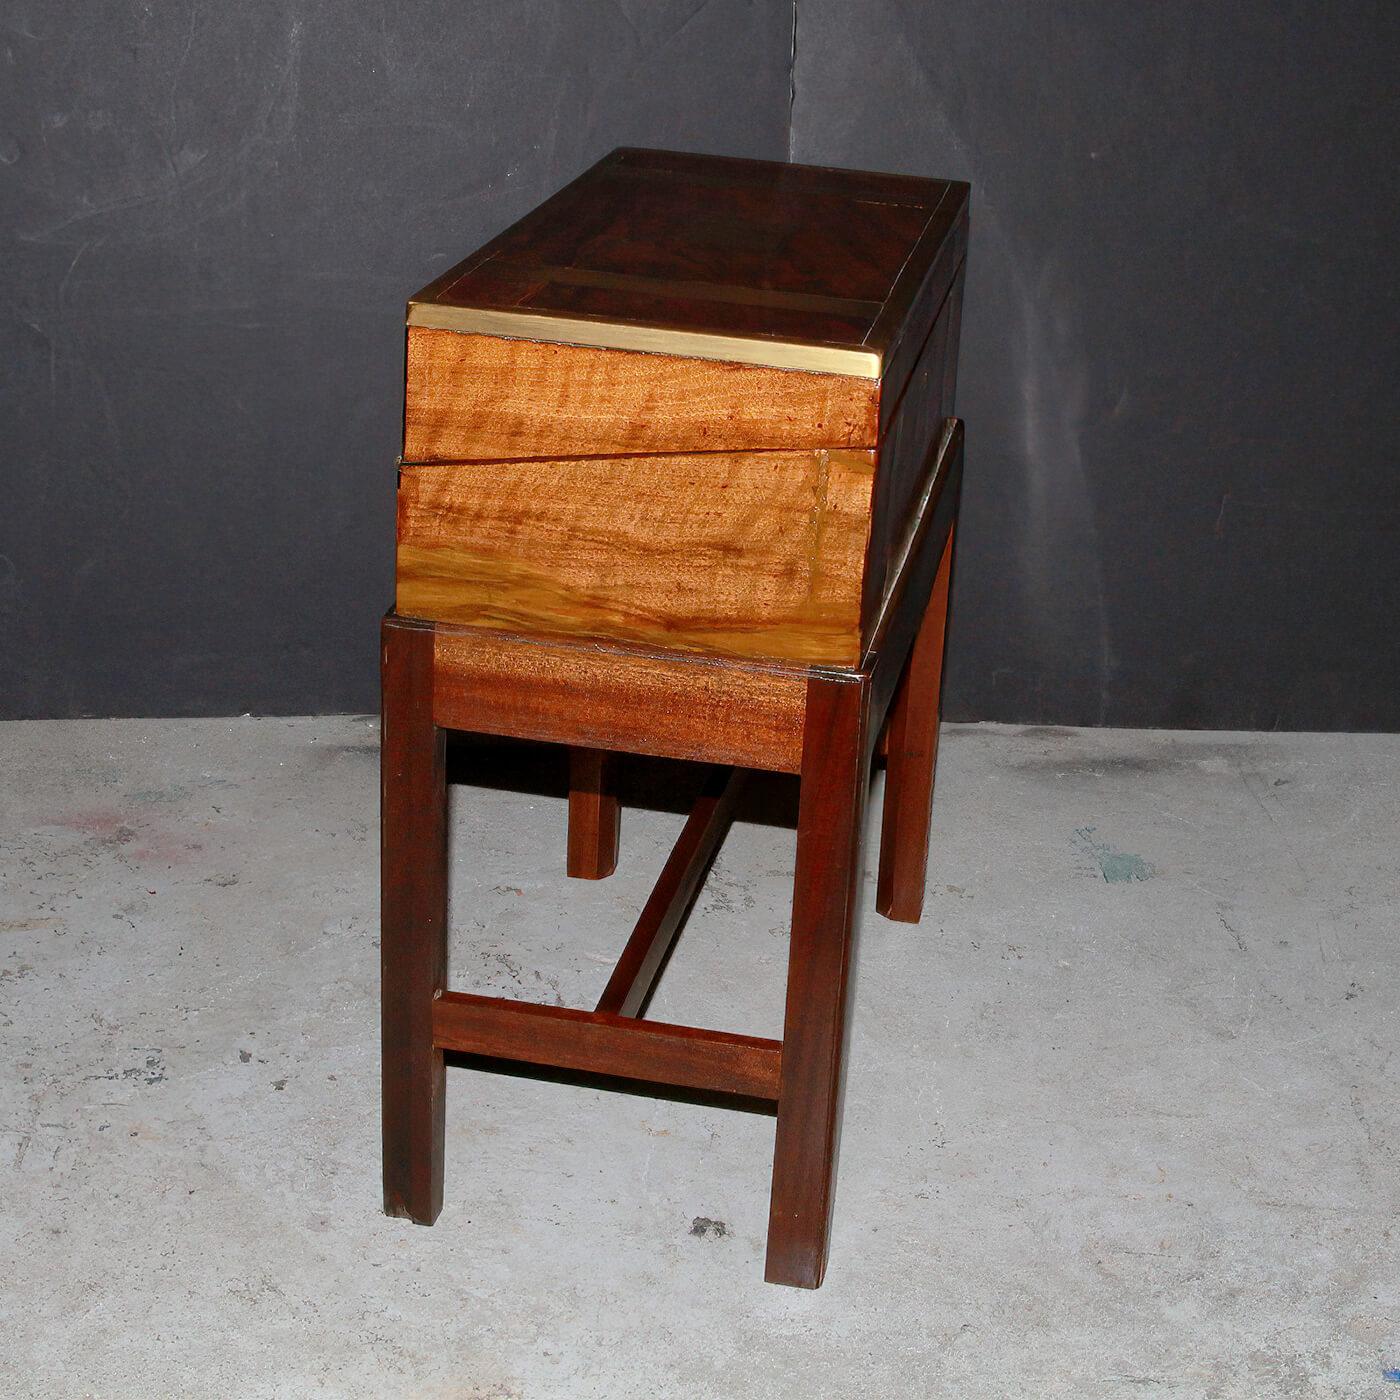 Mid-19th Century English Campaign Lap Desk on Stand